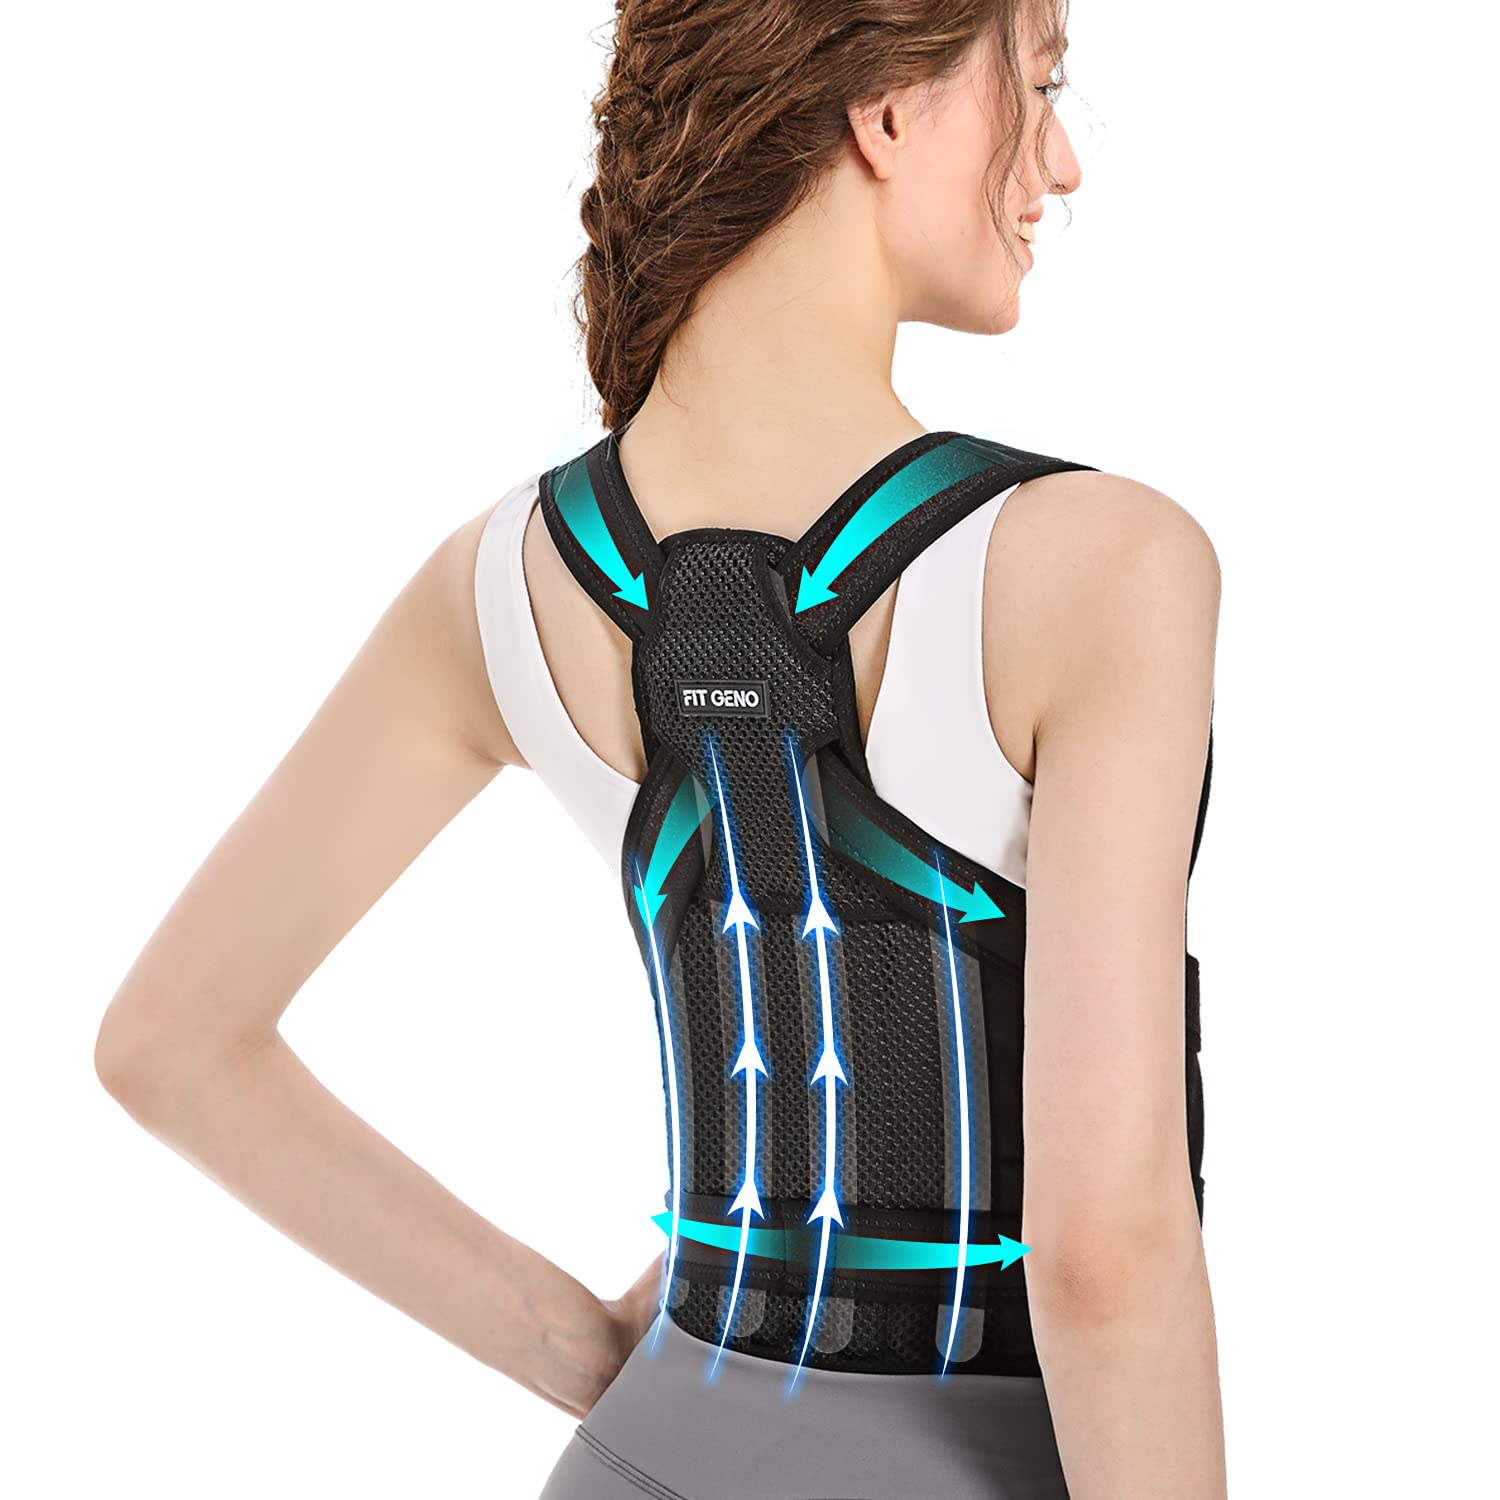 177. Modetro Sports Posture Corrector Spinal Support - Physical Therapy  Posture Brace for Men or Women - Back, Shoulder, and Neck Pain Relief -  Spinal Cord Posture Support, Health & Nutrition, Braces